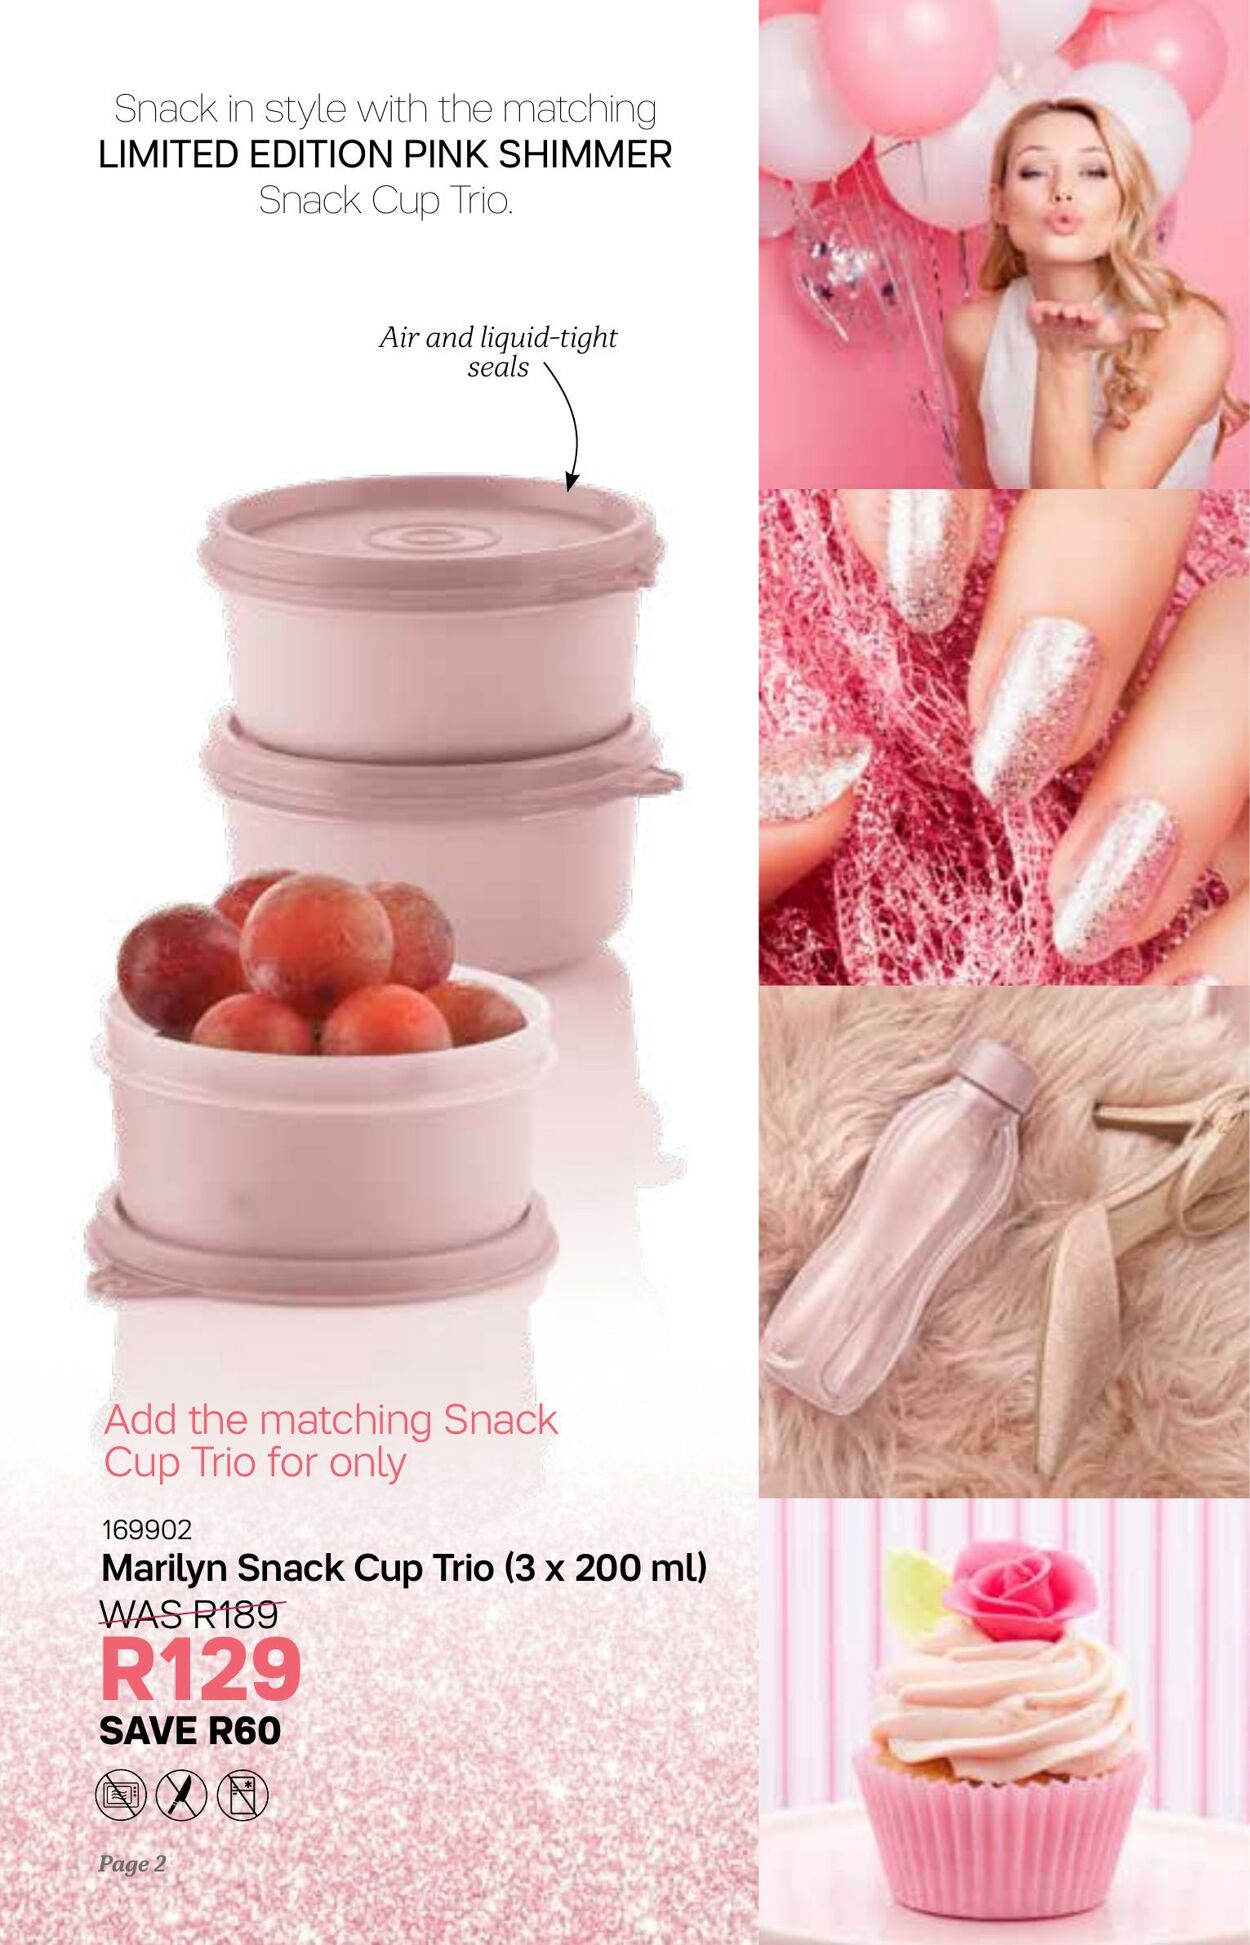 Tupperware Catalogue with Current Prices 27.11 - 31.12